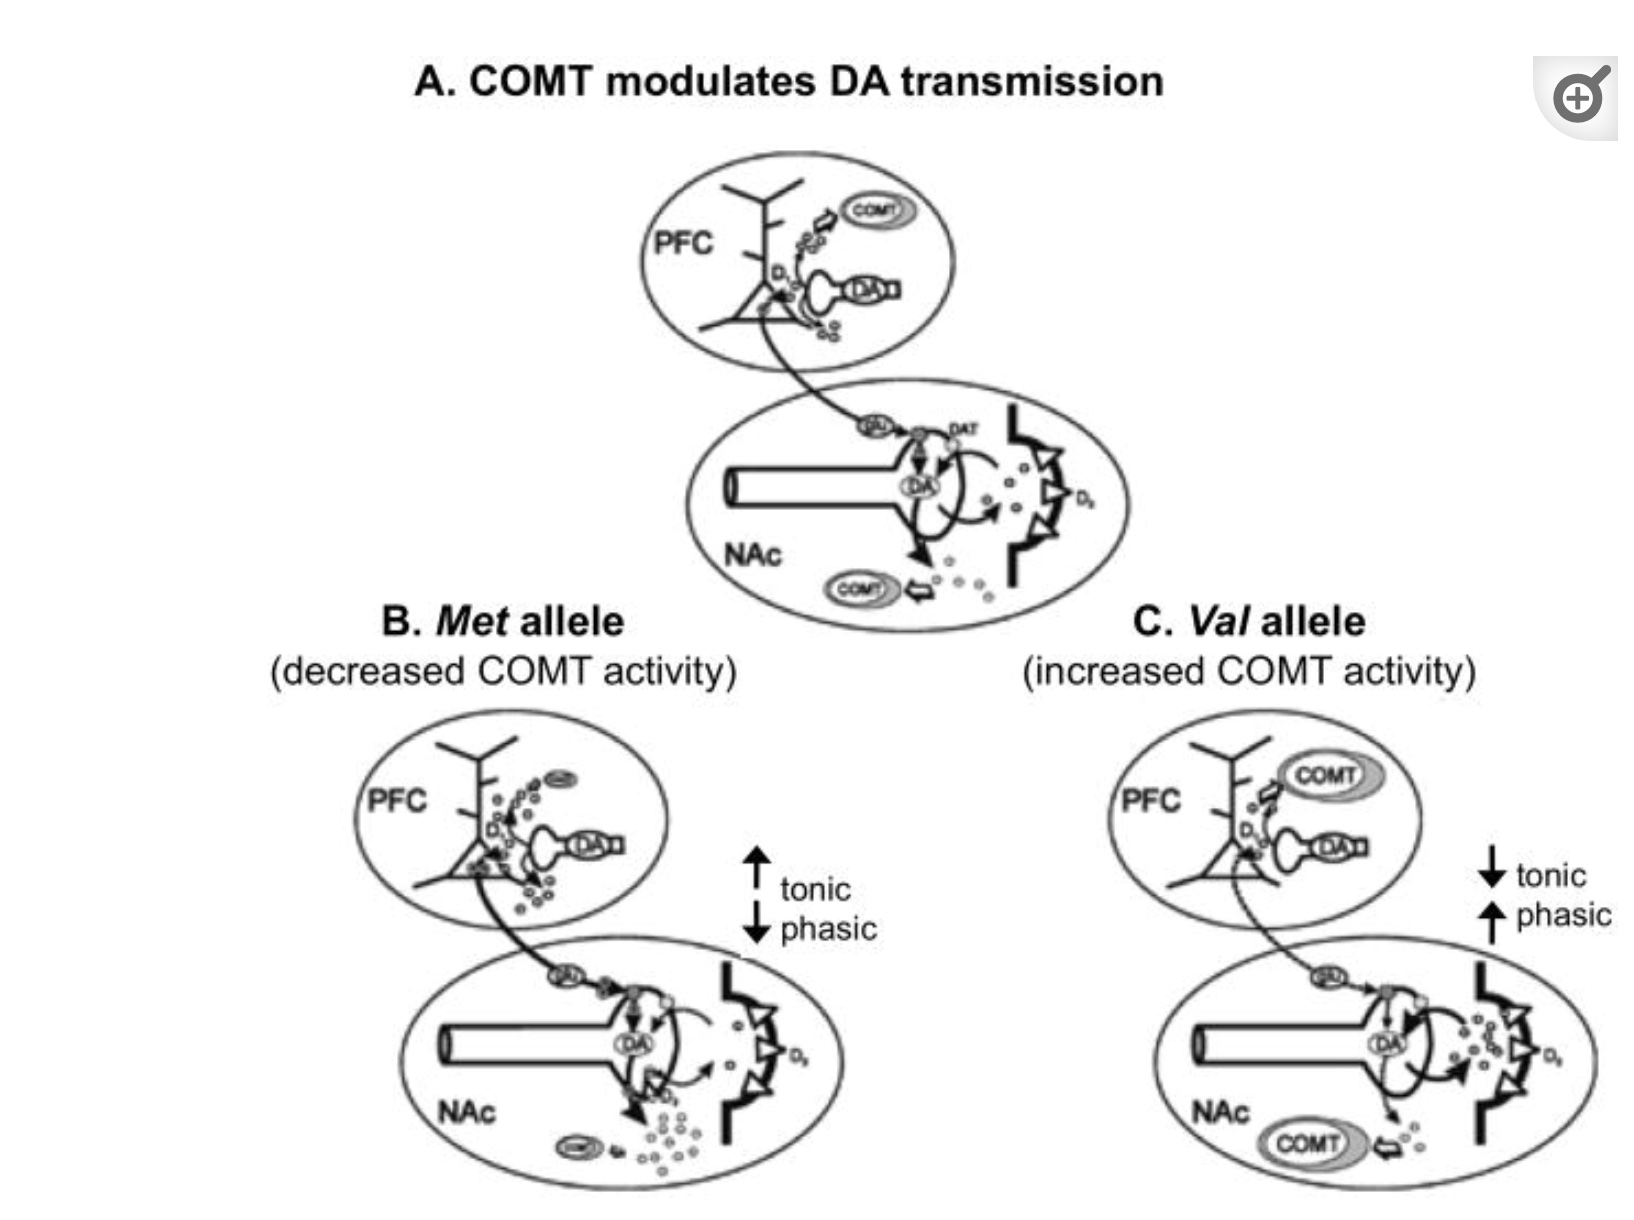 PMC3816524 screenshot showing altered dopamine transmission with COMT variant